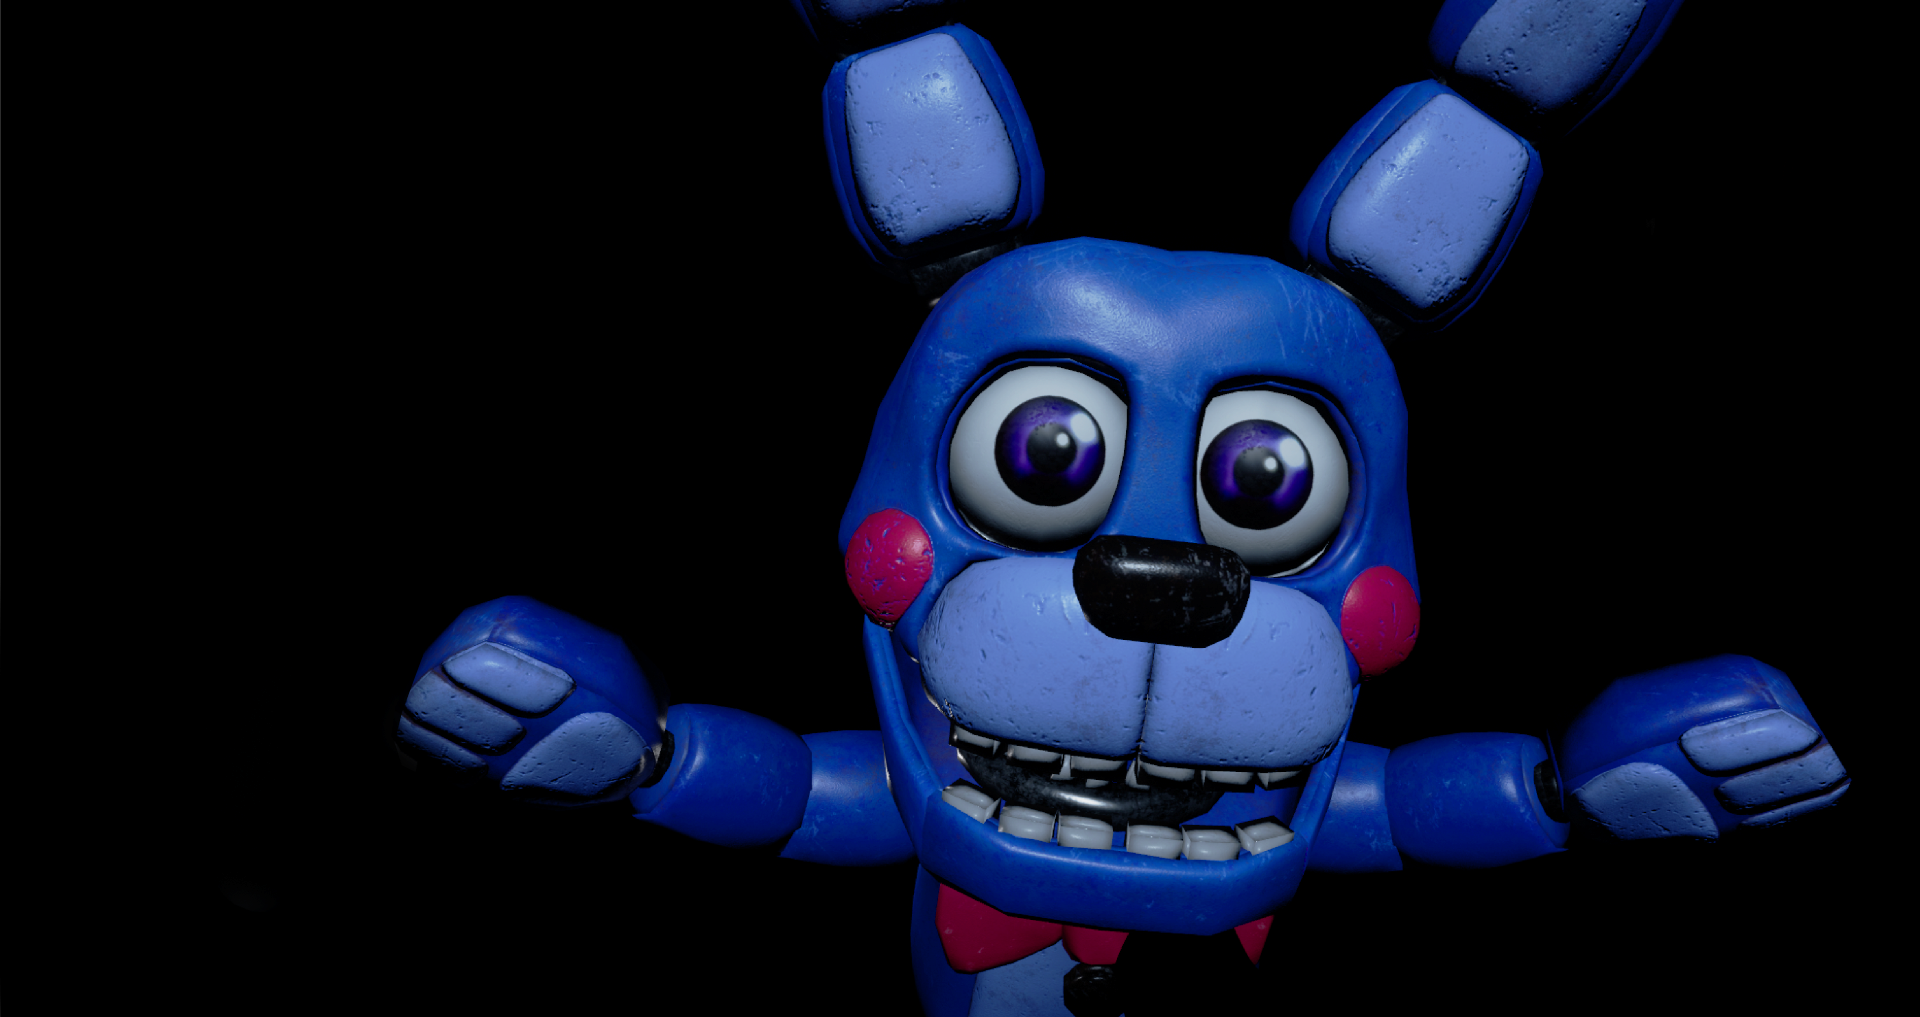 Five Nights at Freddy's: Help Wanted 2, Five Nights at Freddy's Wiki